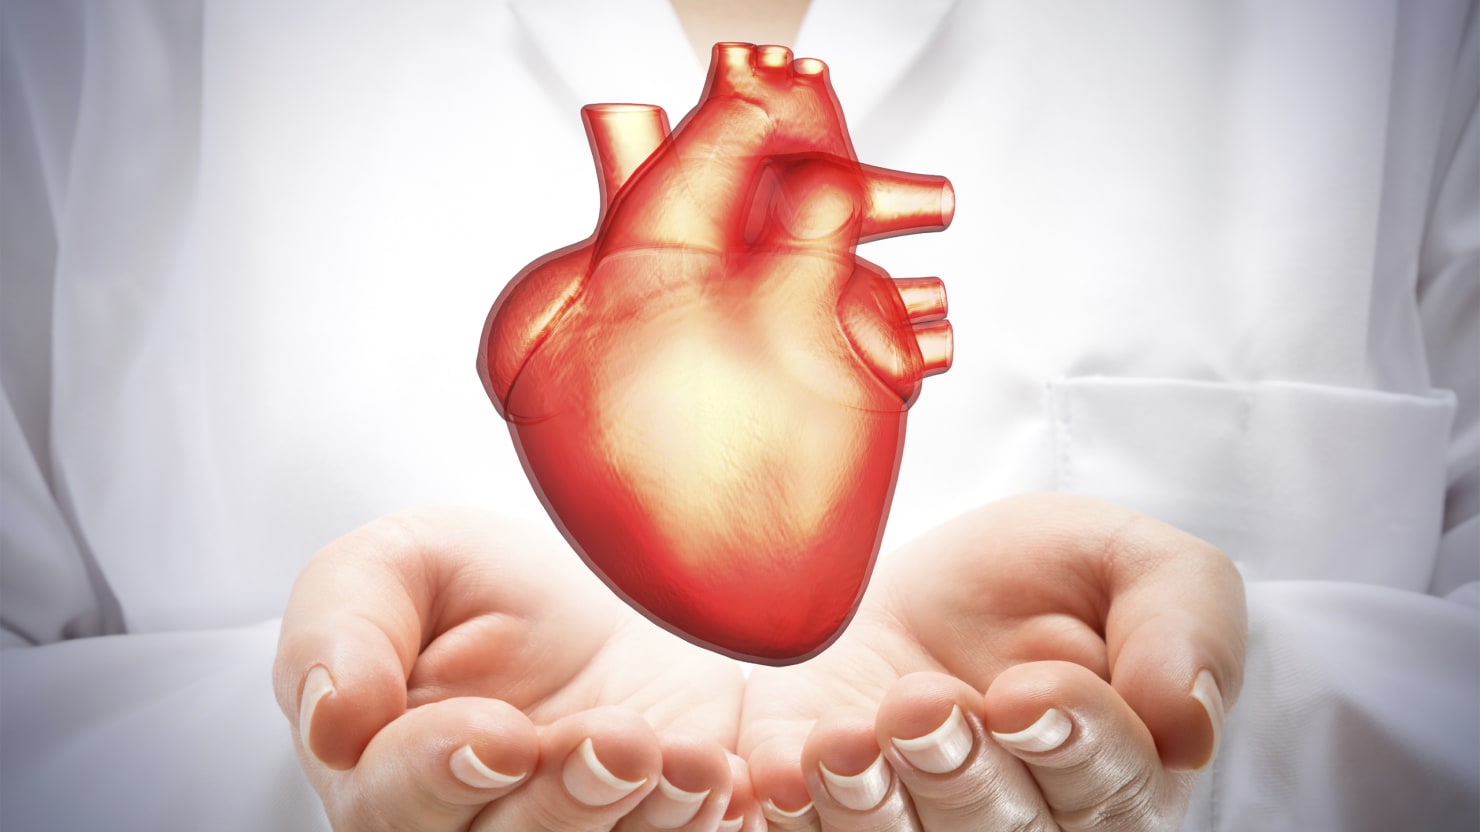 Heart Transplant Research and Investigative Studies